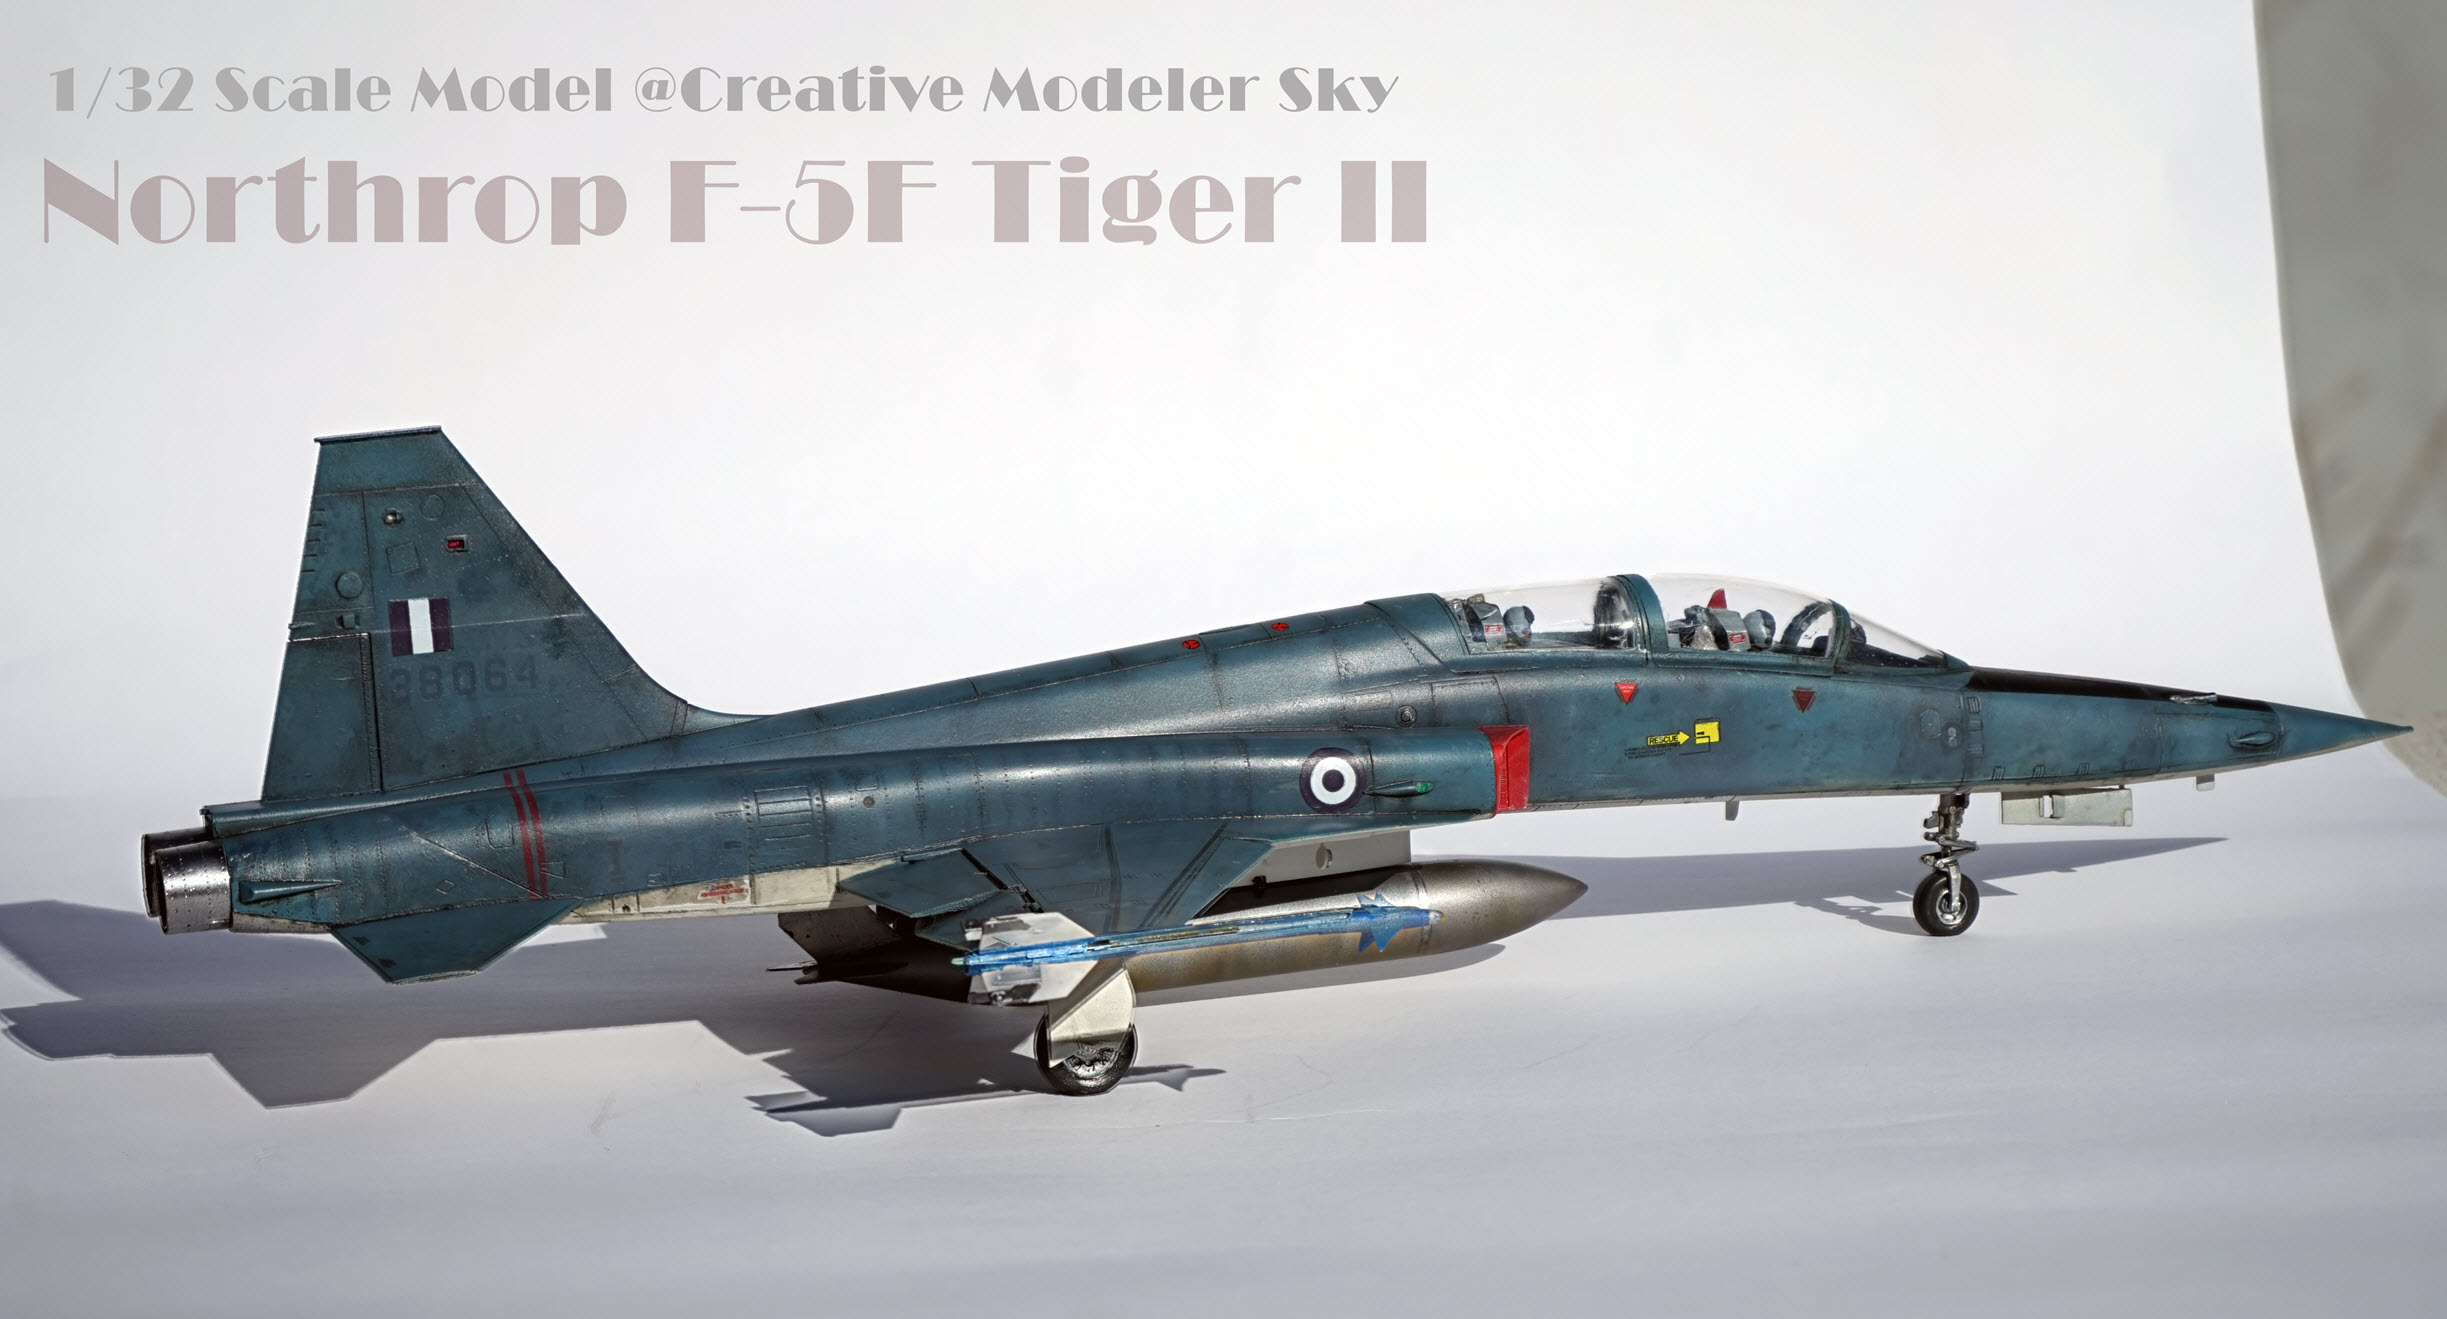 Northrop F-5F Freedom Fighter, 1/32 in Aegean Blue/Weathered